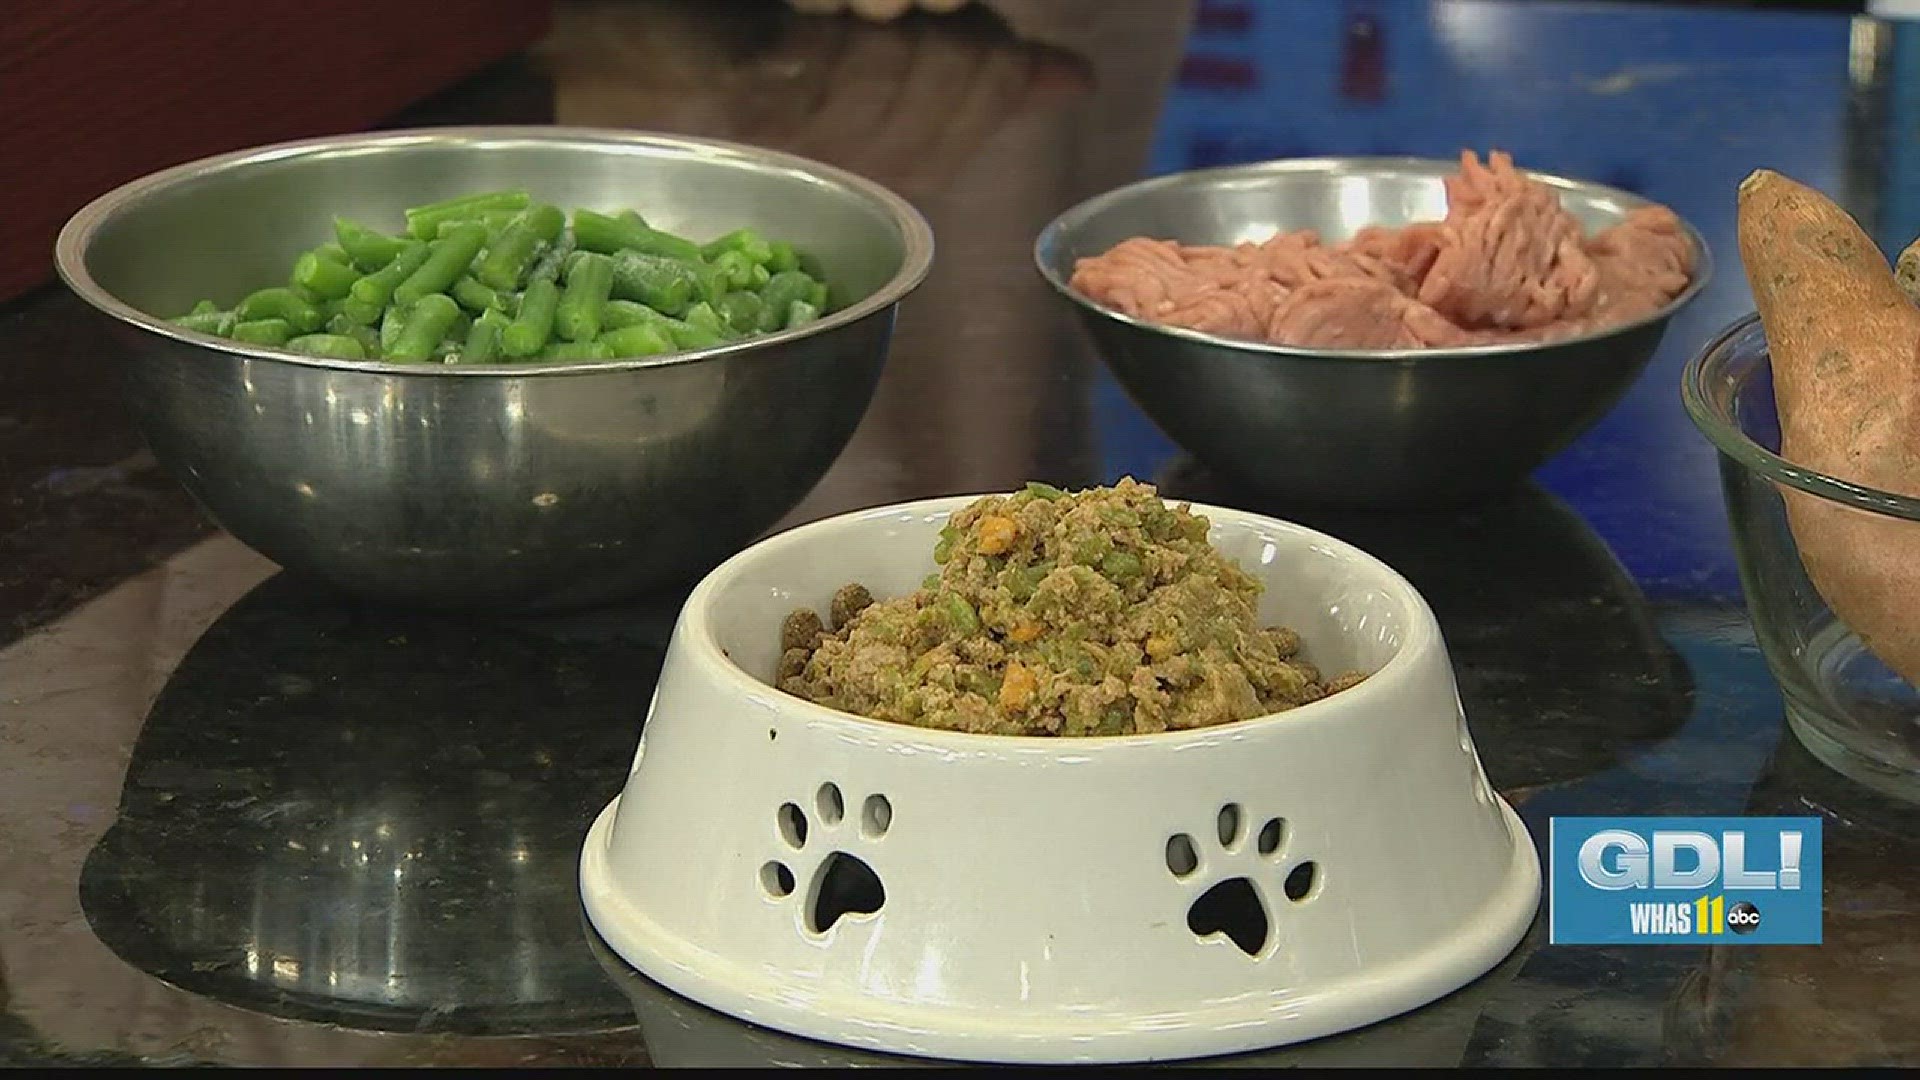 Healthy pet food can be made easily at home